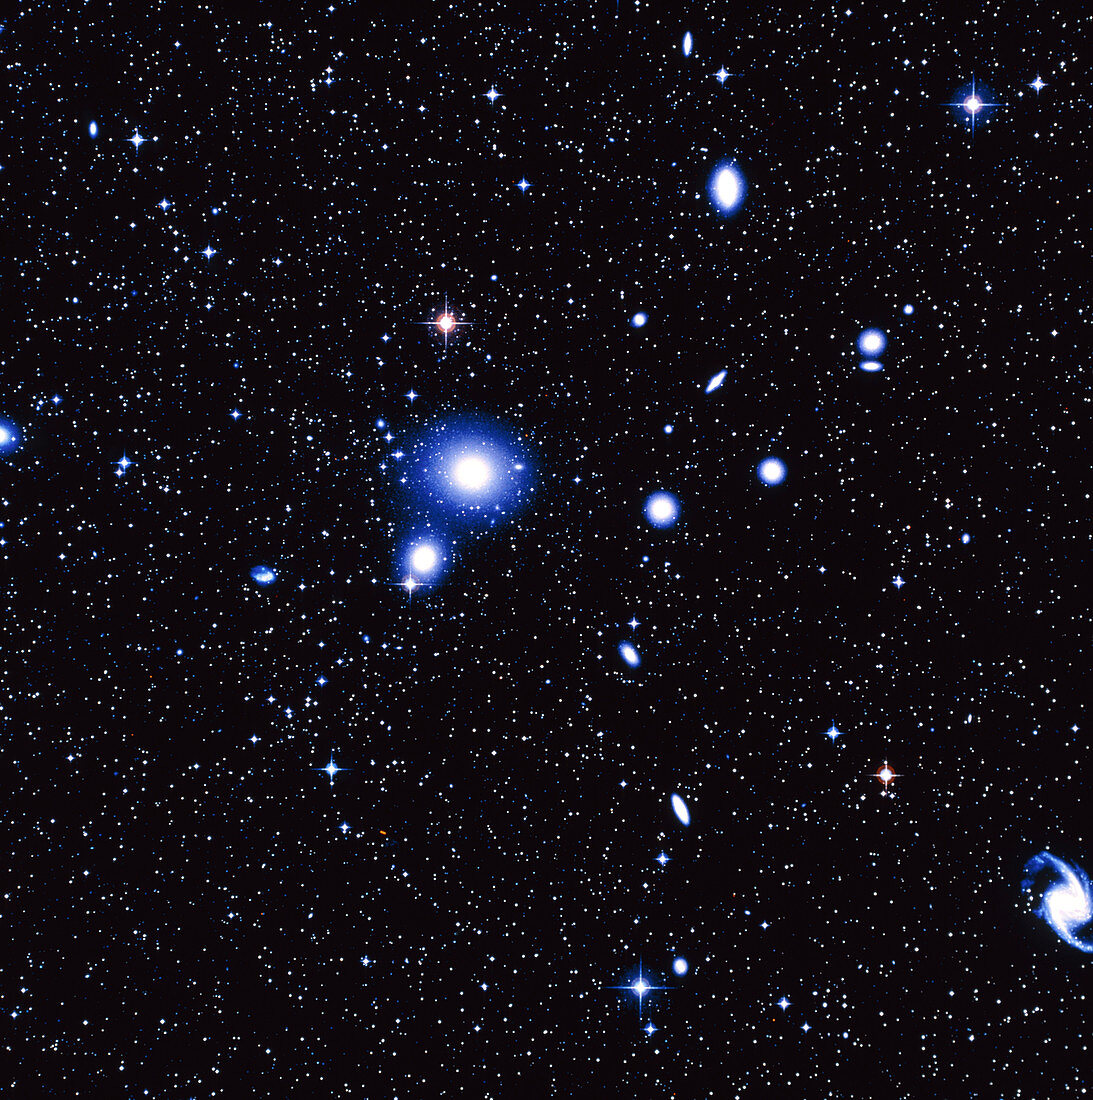 Optical image of the Fornax cluster of galaxies